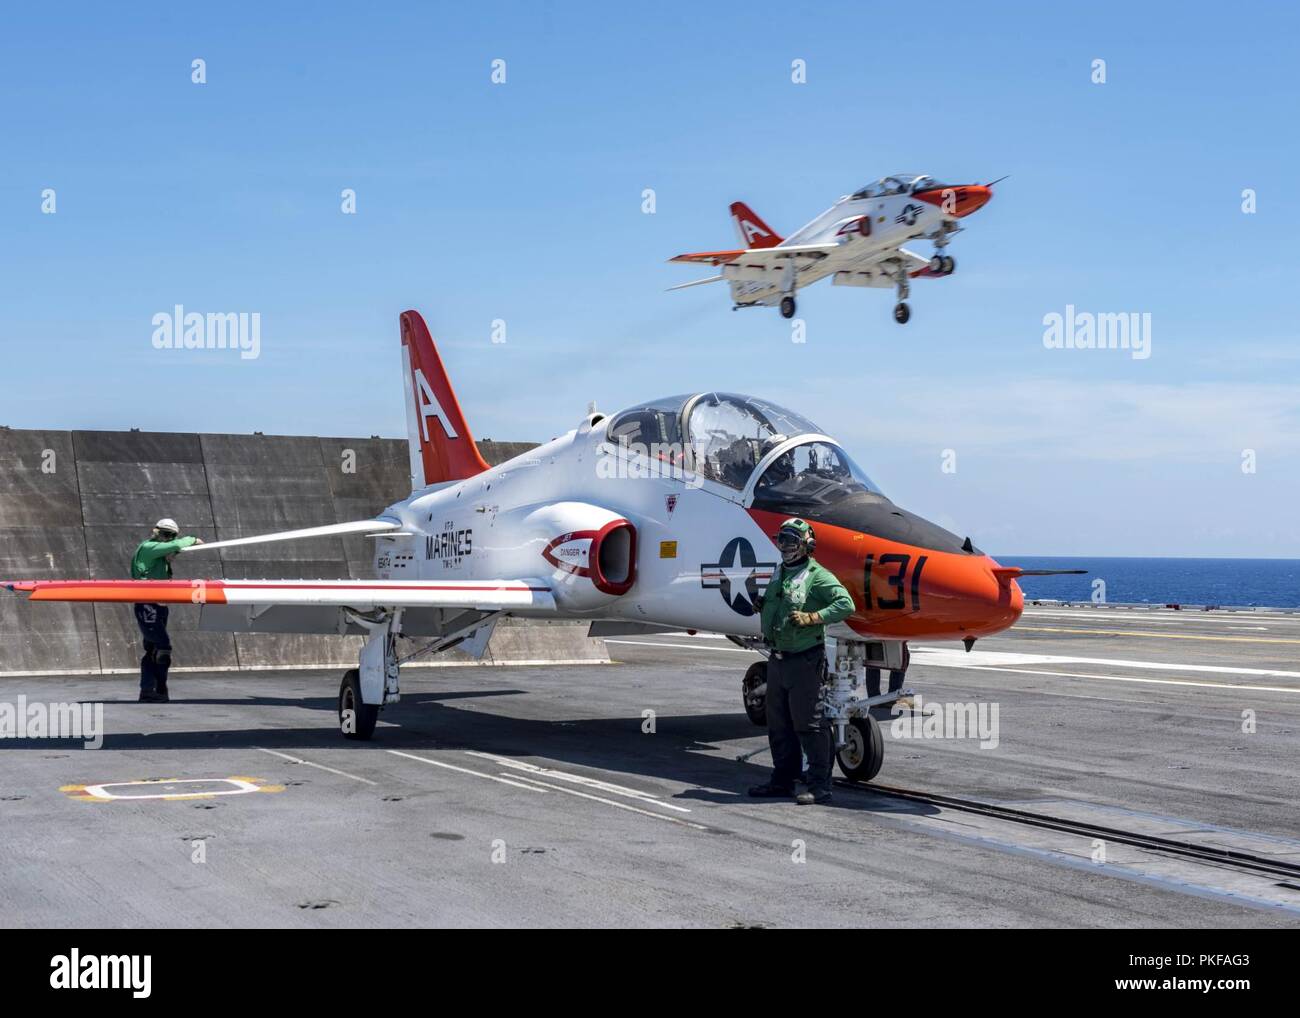 ATLANTIC OCEAN (Aug. 9, 2018) A T-45C Goshawk attached to Training Air Wing 1 prepares to launch from the aircraft carrier USS George H.W. Bush (CVN 77). The ship is underway conducting routine training exercises to maintain carrier readiness. Stock Photo